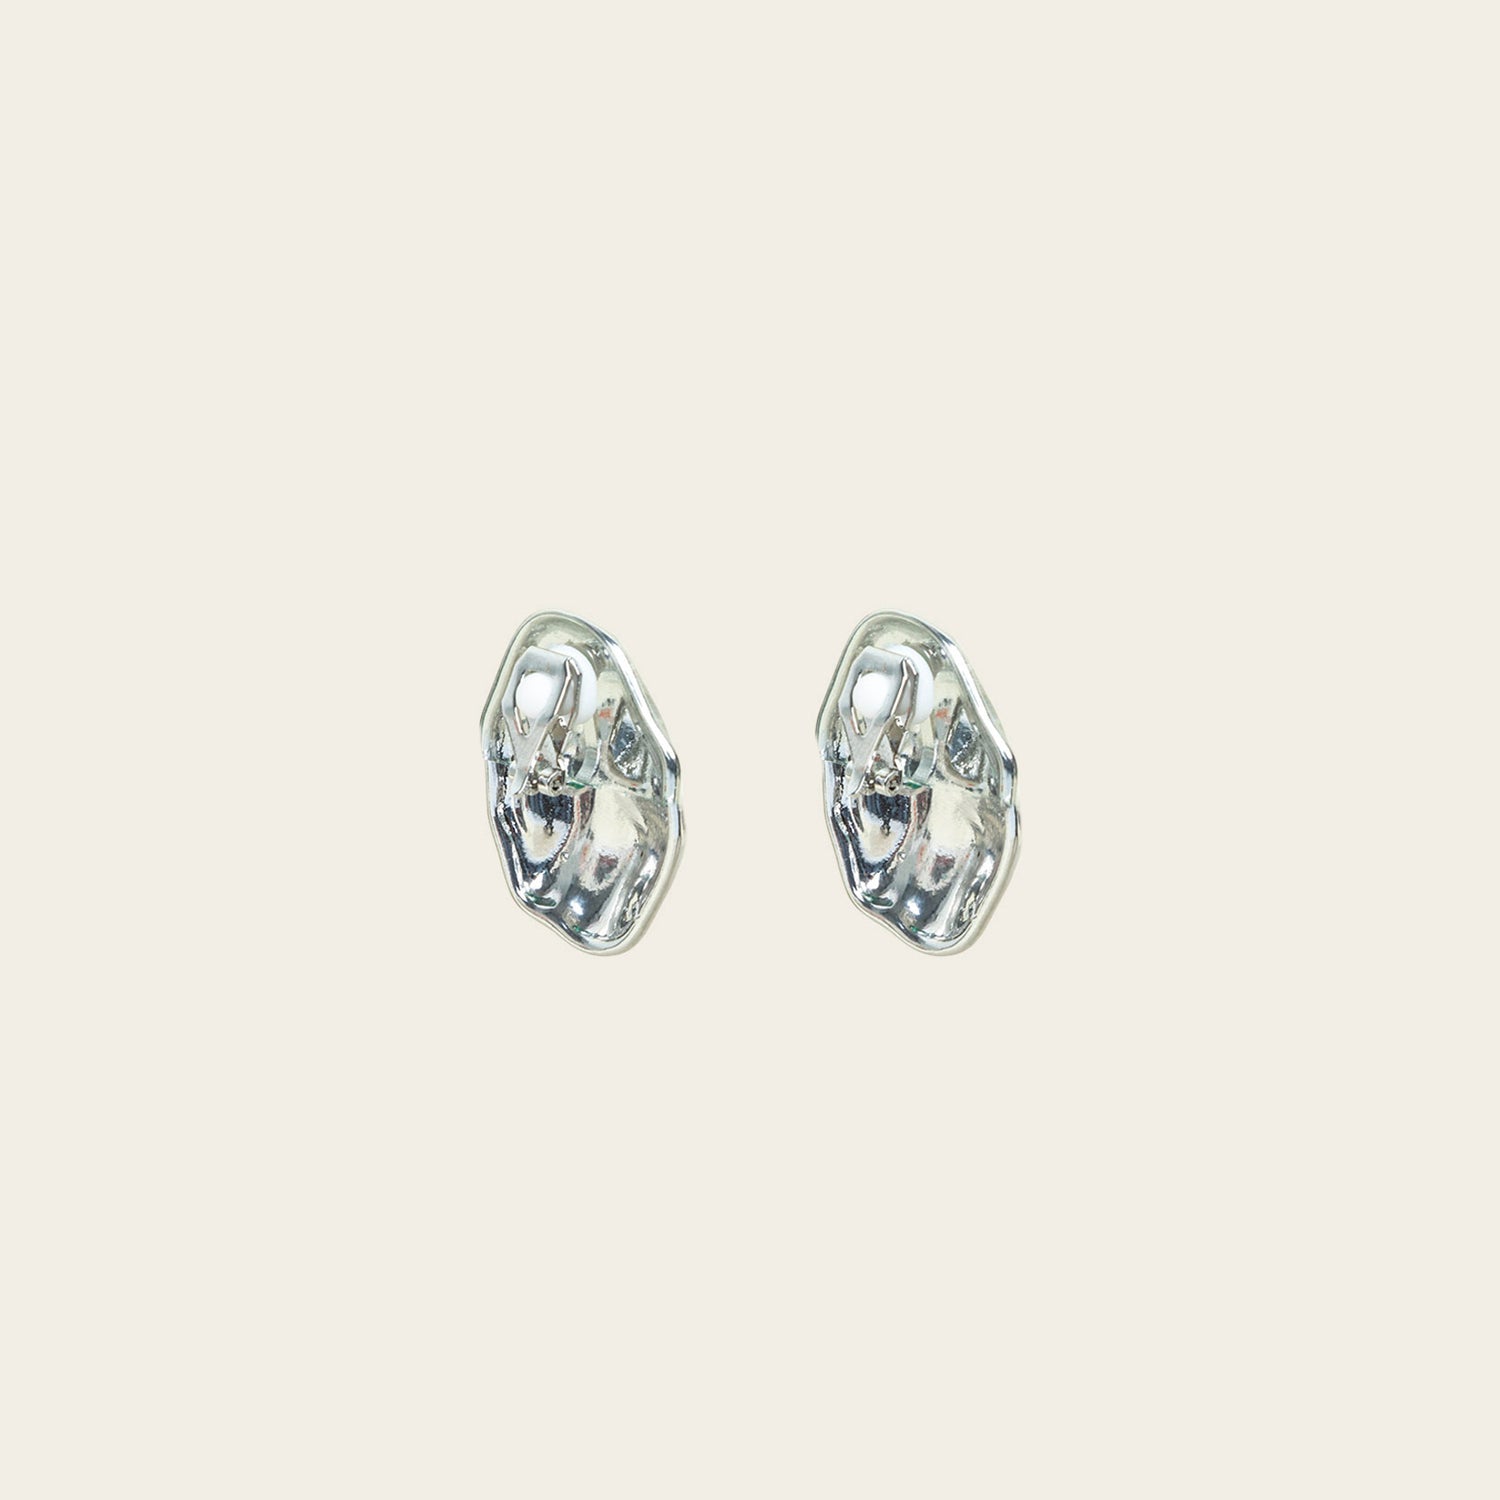 Image of the Amaya Clip On Earrings in Silver feature a secure padded clip-on closure type, making them suitable for all ear types.The average comfortable wear duration is 8-12 hours, and the Copper Alloy construction ensures a reliable and secure hold. The item is sold as one pair; adjustable rubber padding is included.